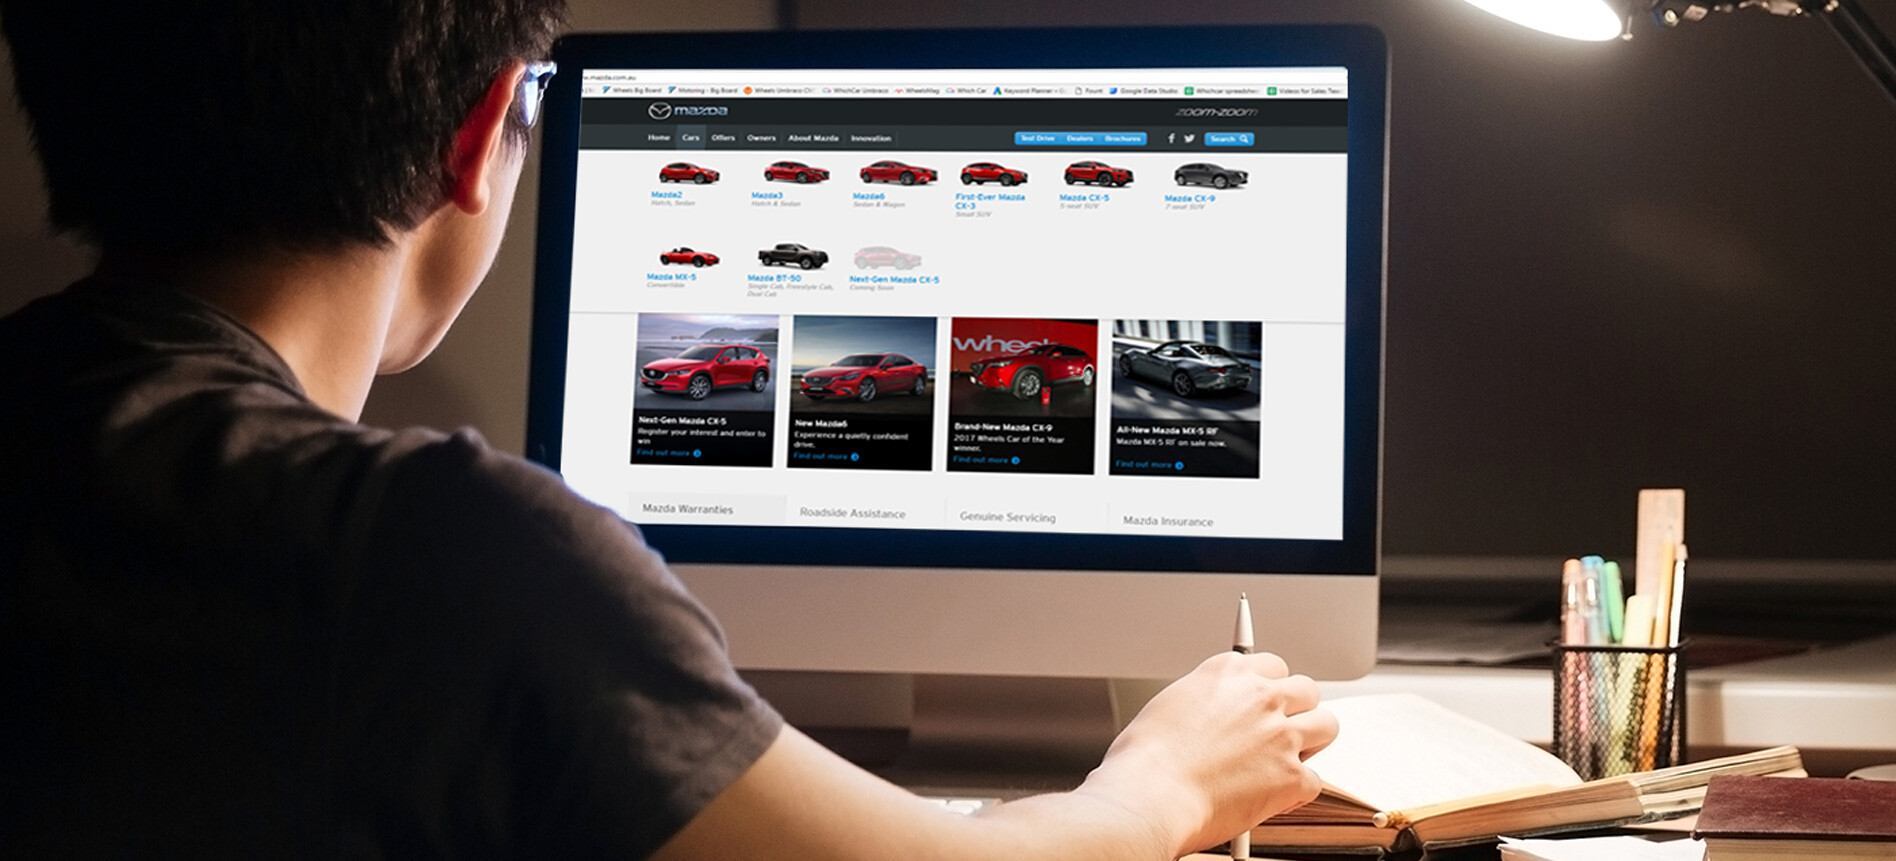 Online vehicle sales remain low for legacy brands